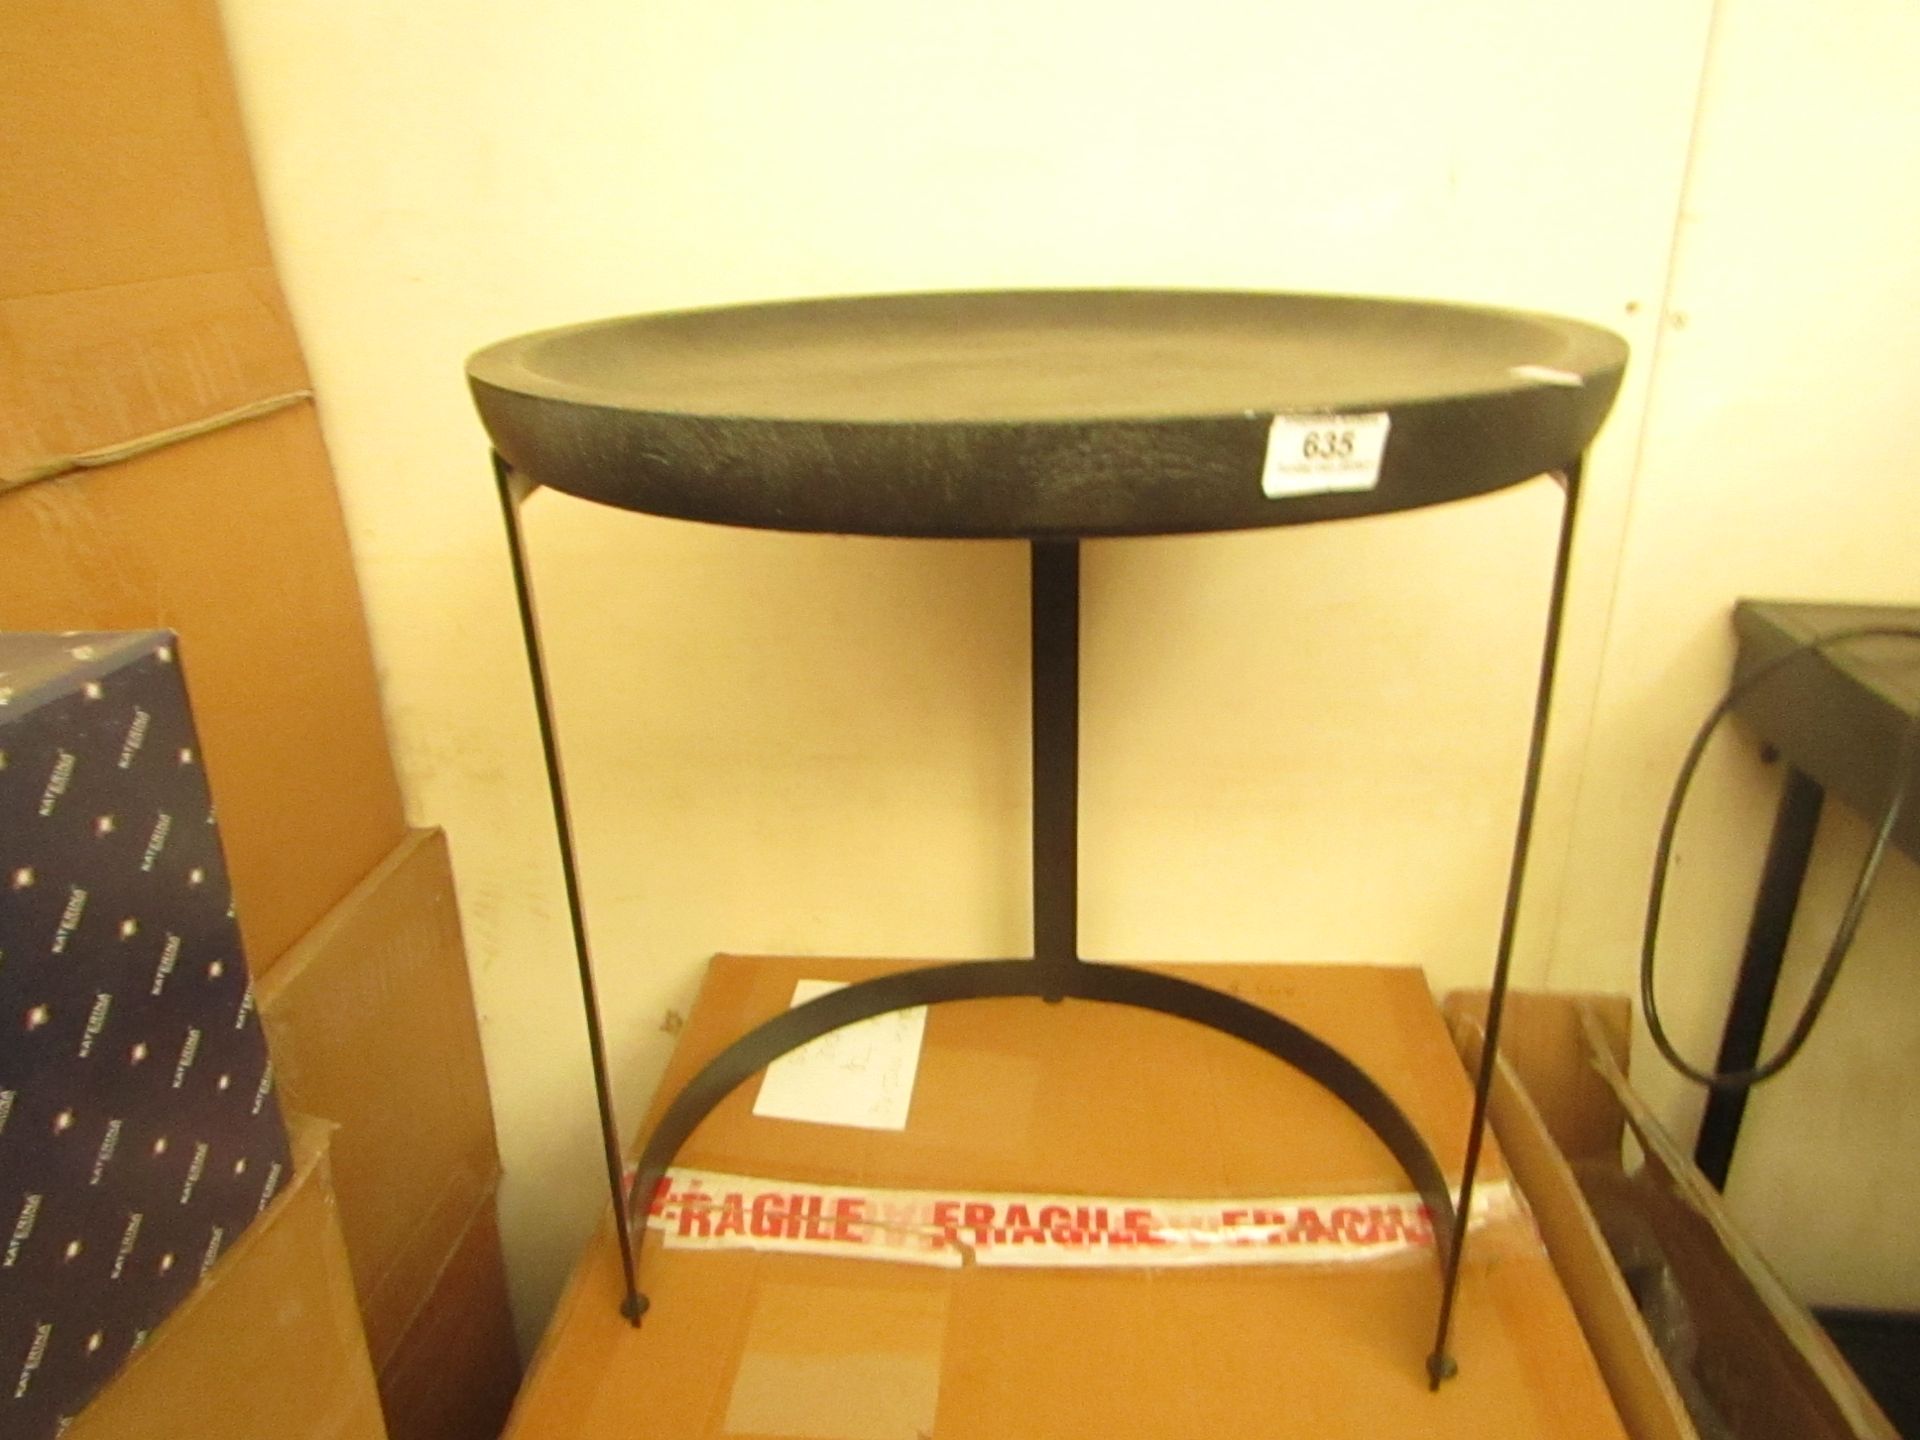 | 1X | COX & COX NEST TABLE, BLACK, UNCHECKED AND BOXED | RRP WHEN SET OF 2 £350 |